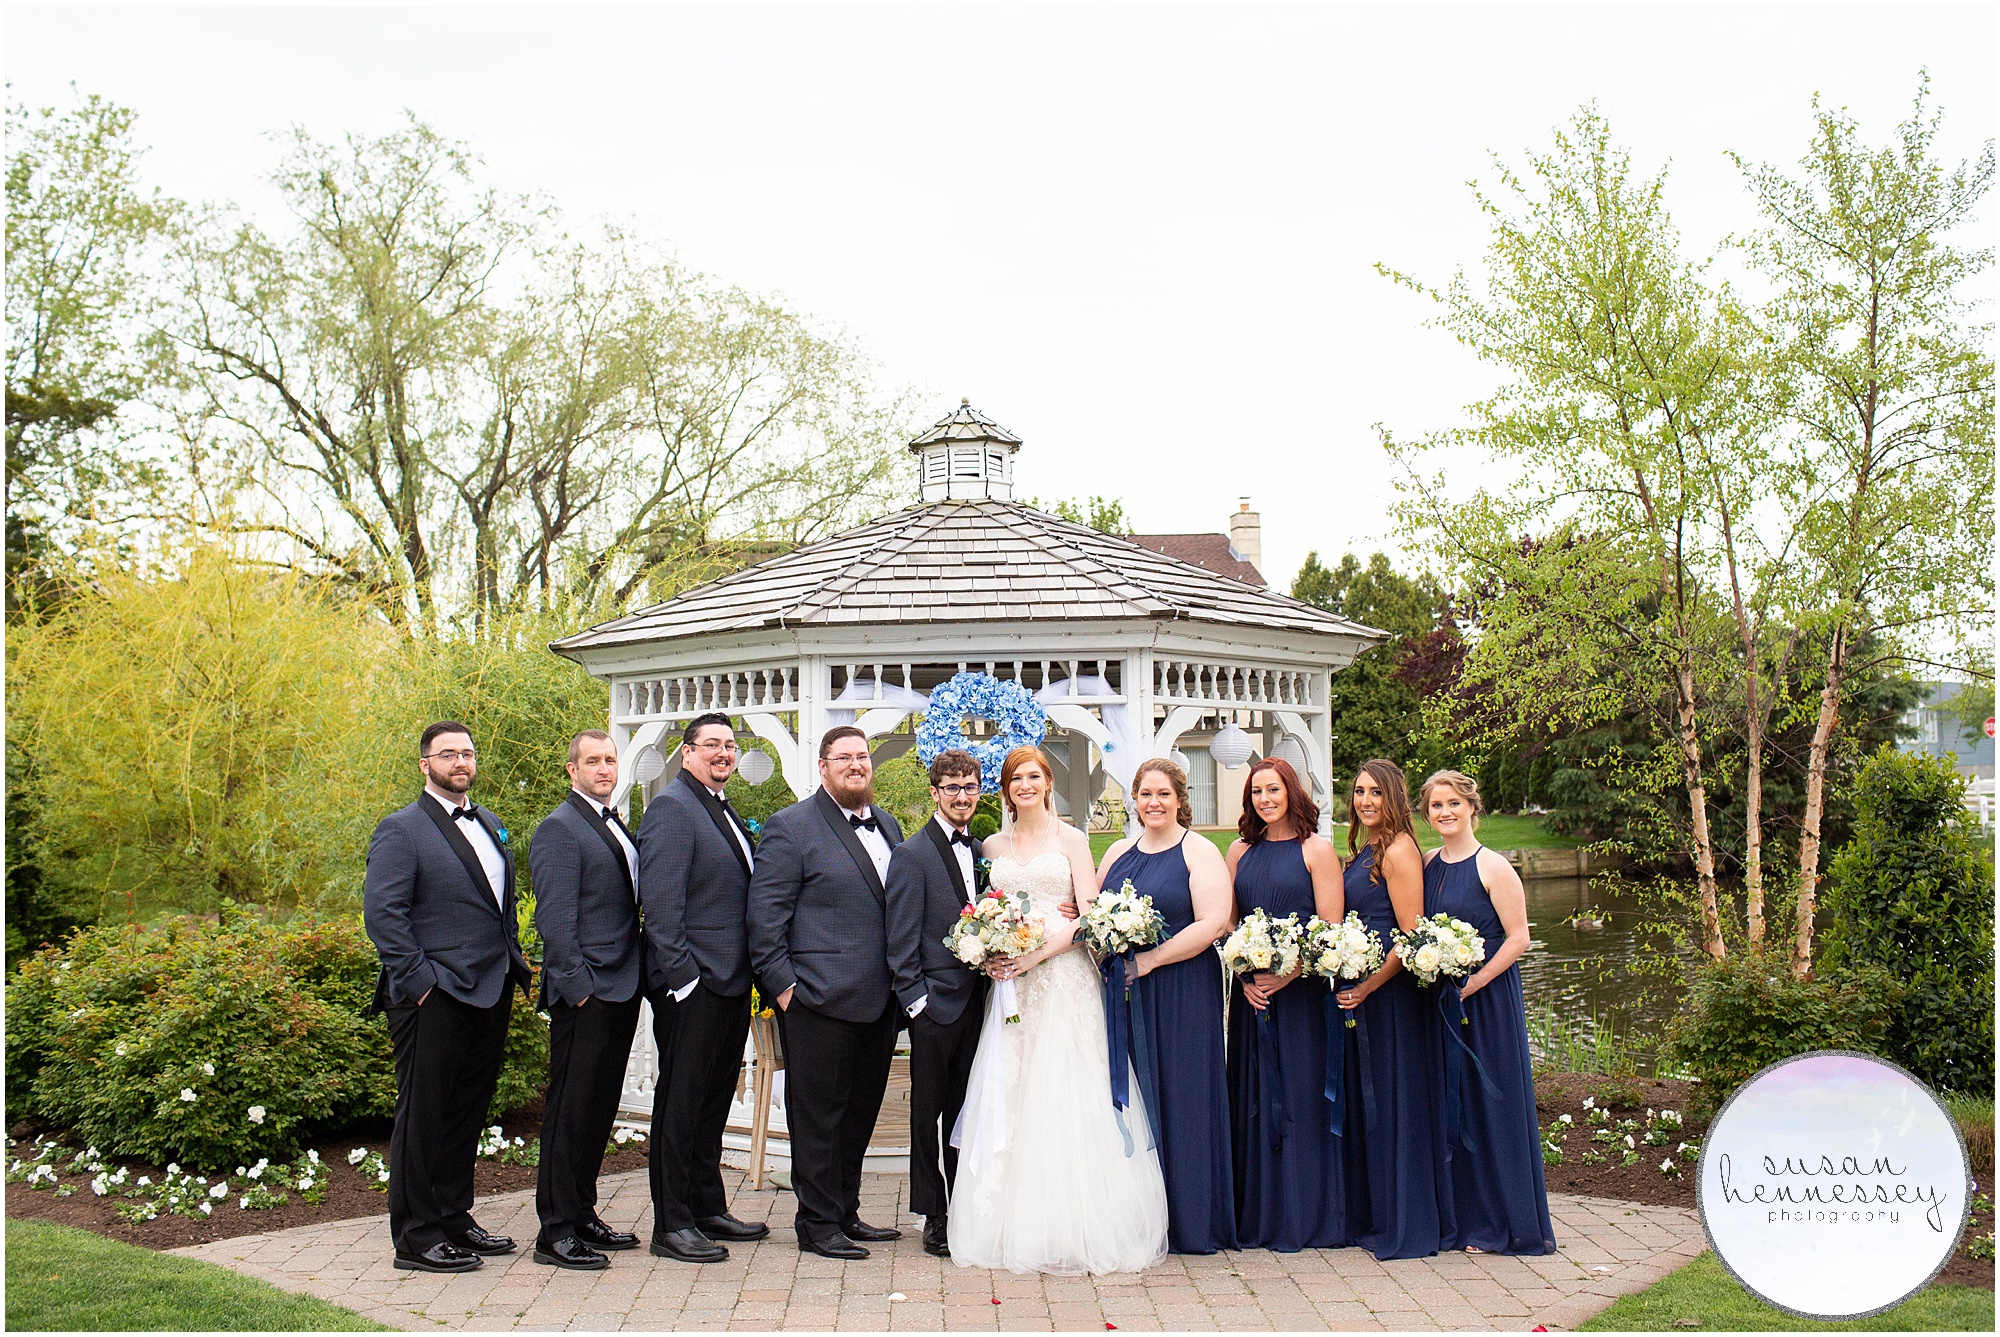 Bridal portraits with bridesmaids in navy blue.